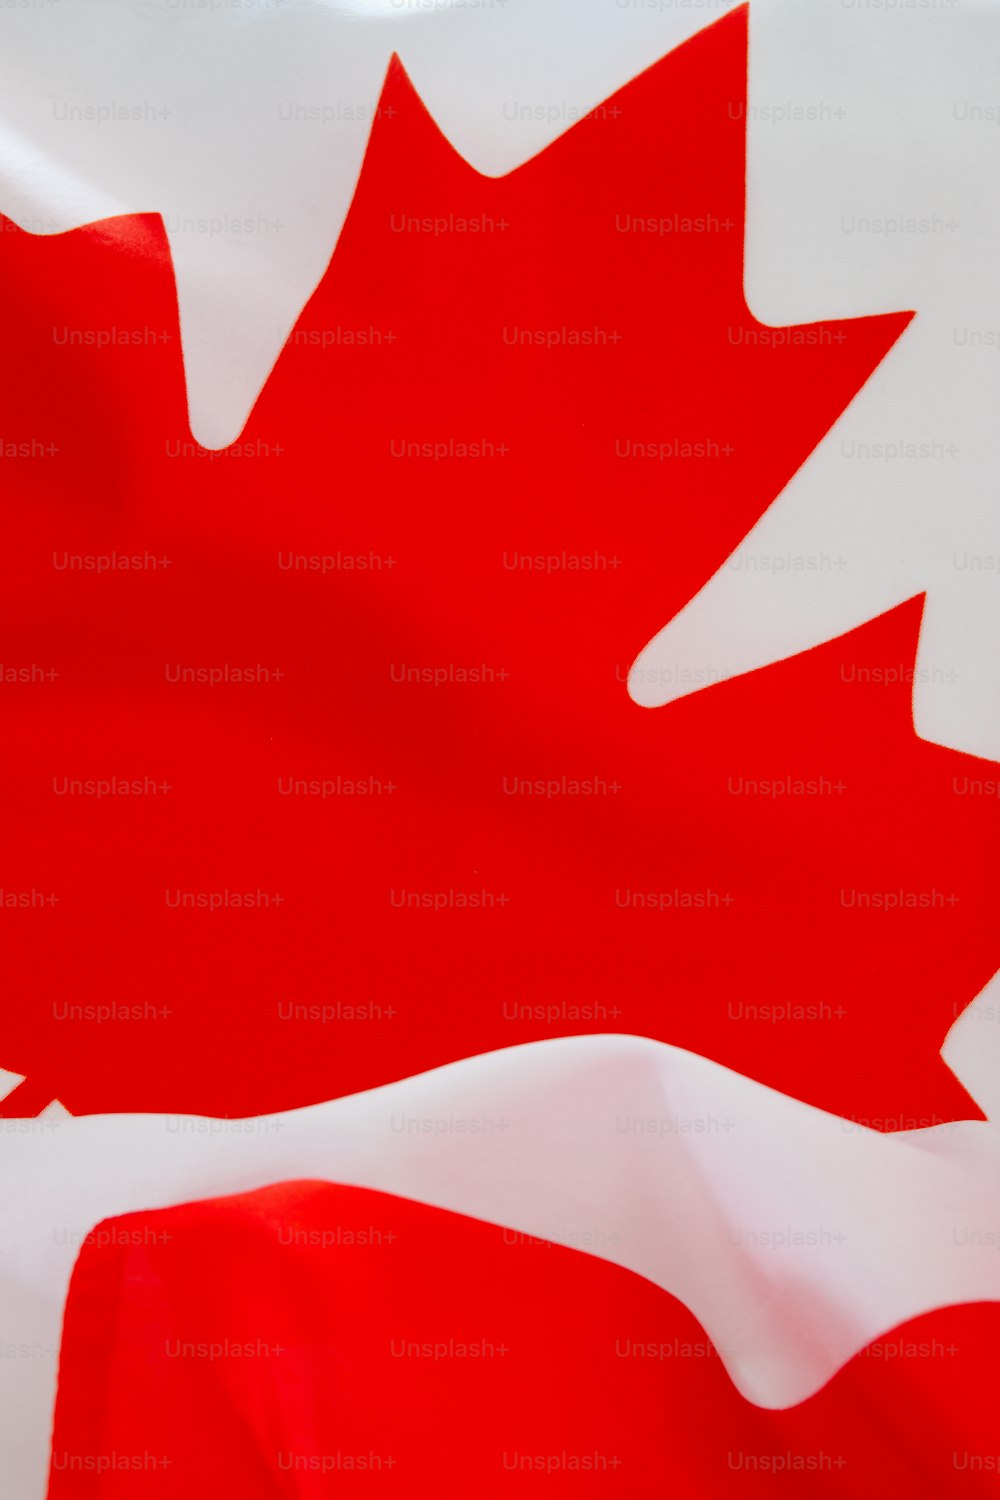 a canadian flag with a red maple leaf on it